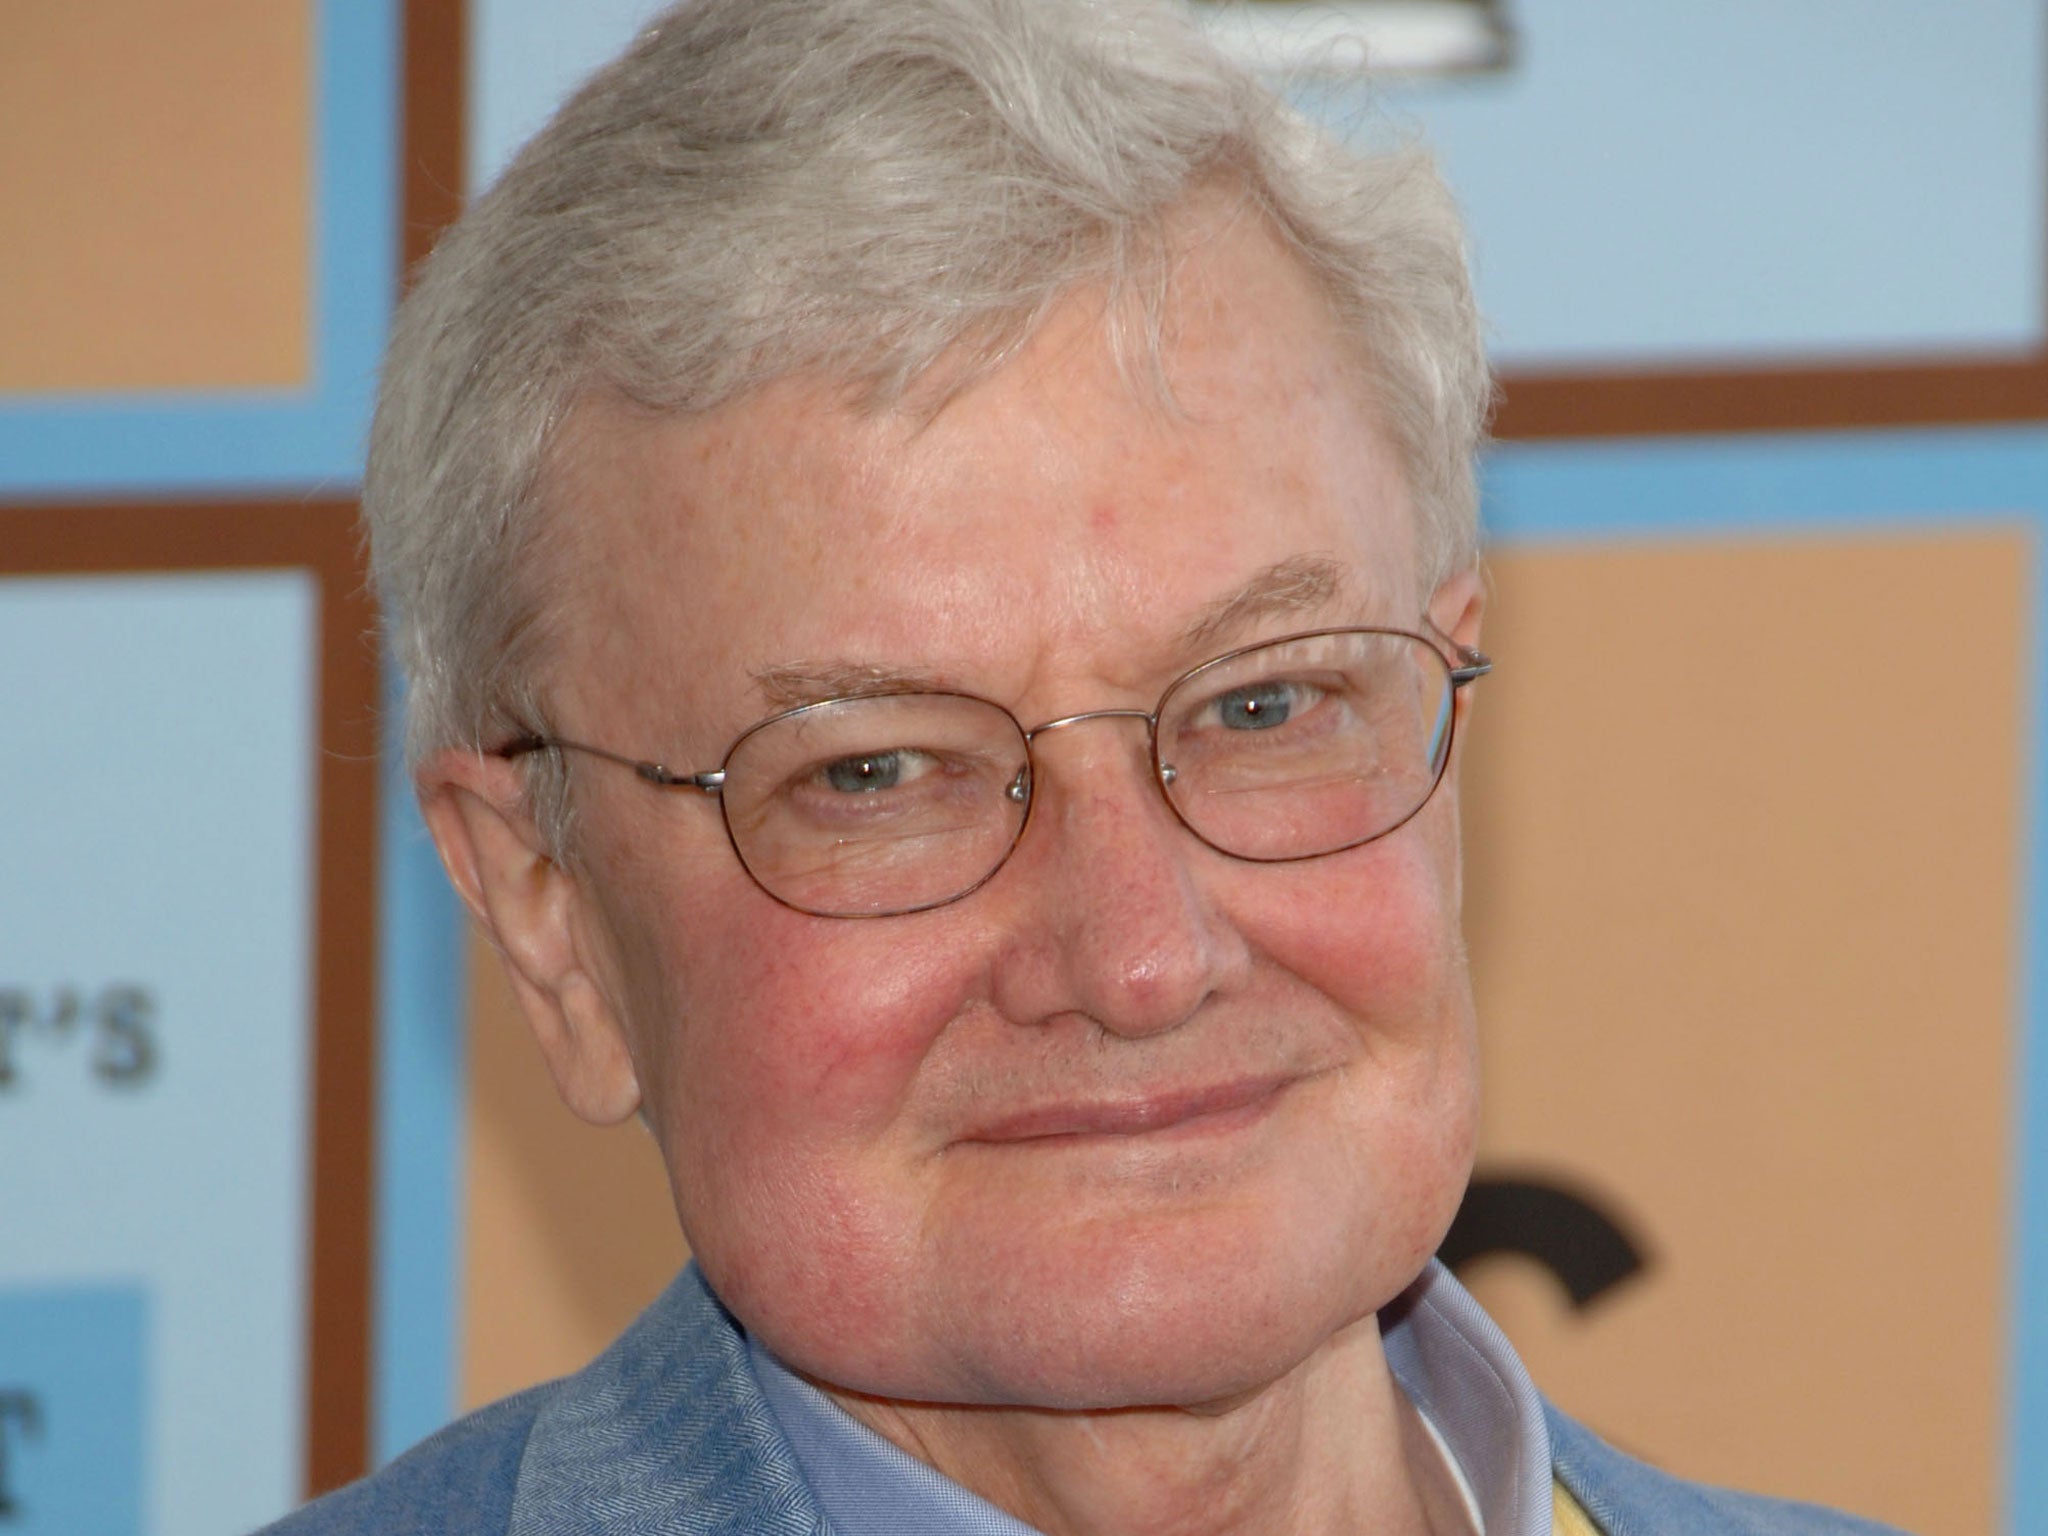 Roger Ebert was the first writer to win a Pulitzer Prize for film criticism